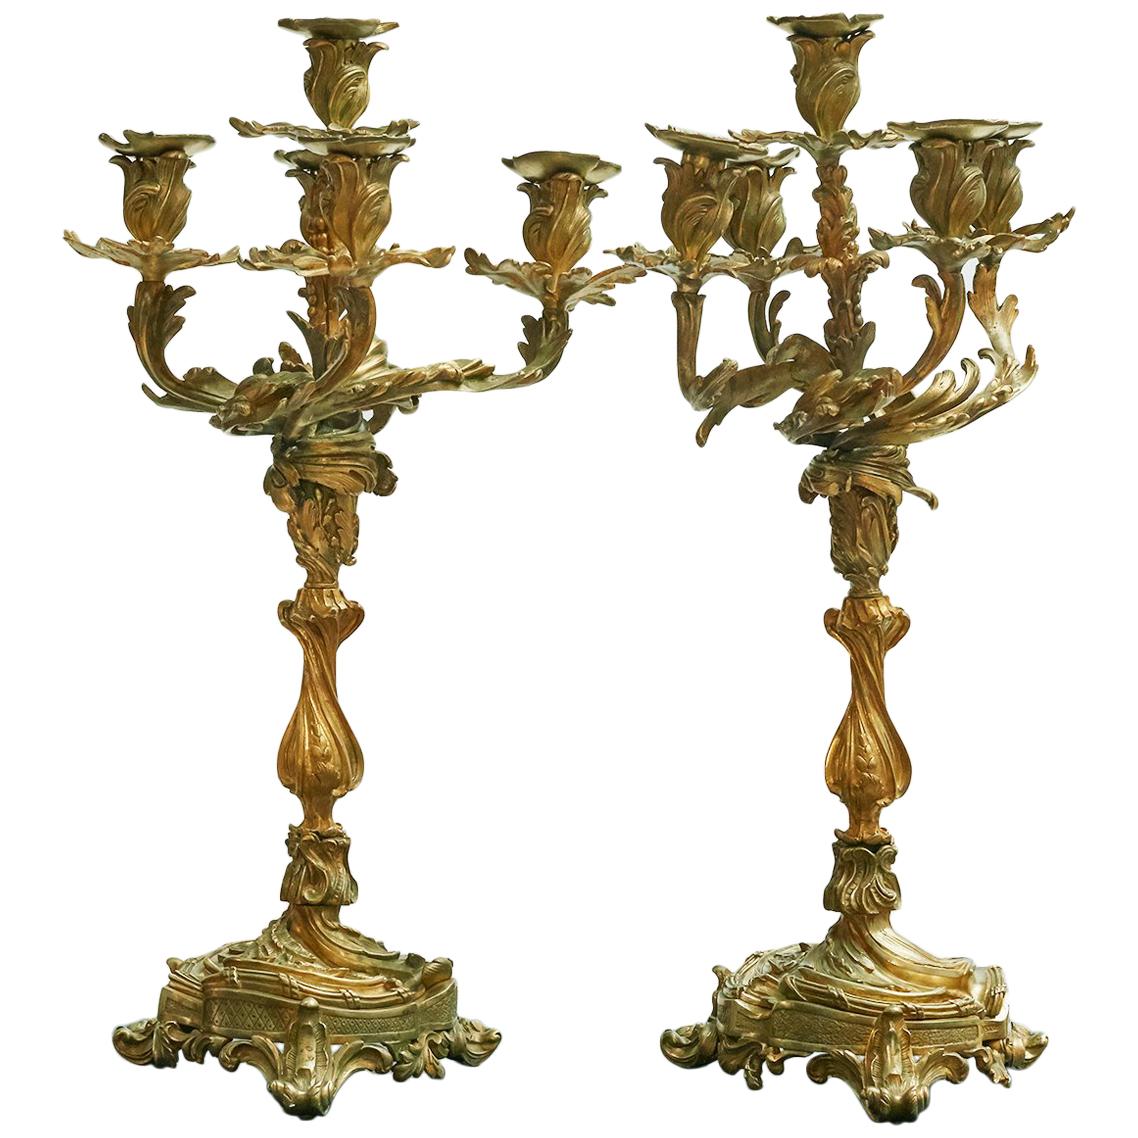 Pair of French New Rococo Gilt Bronze Candelabra with 5 Arms